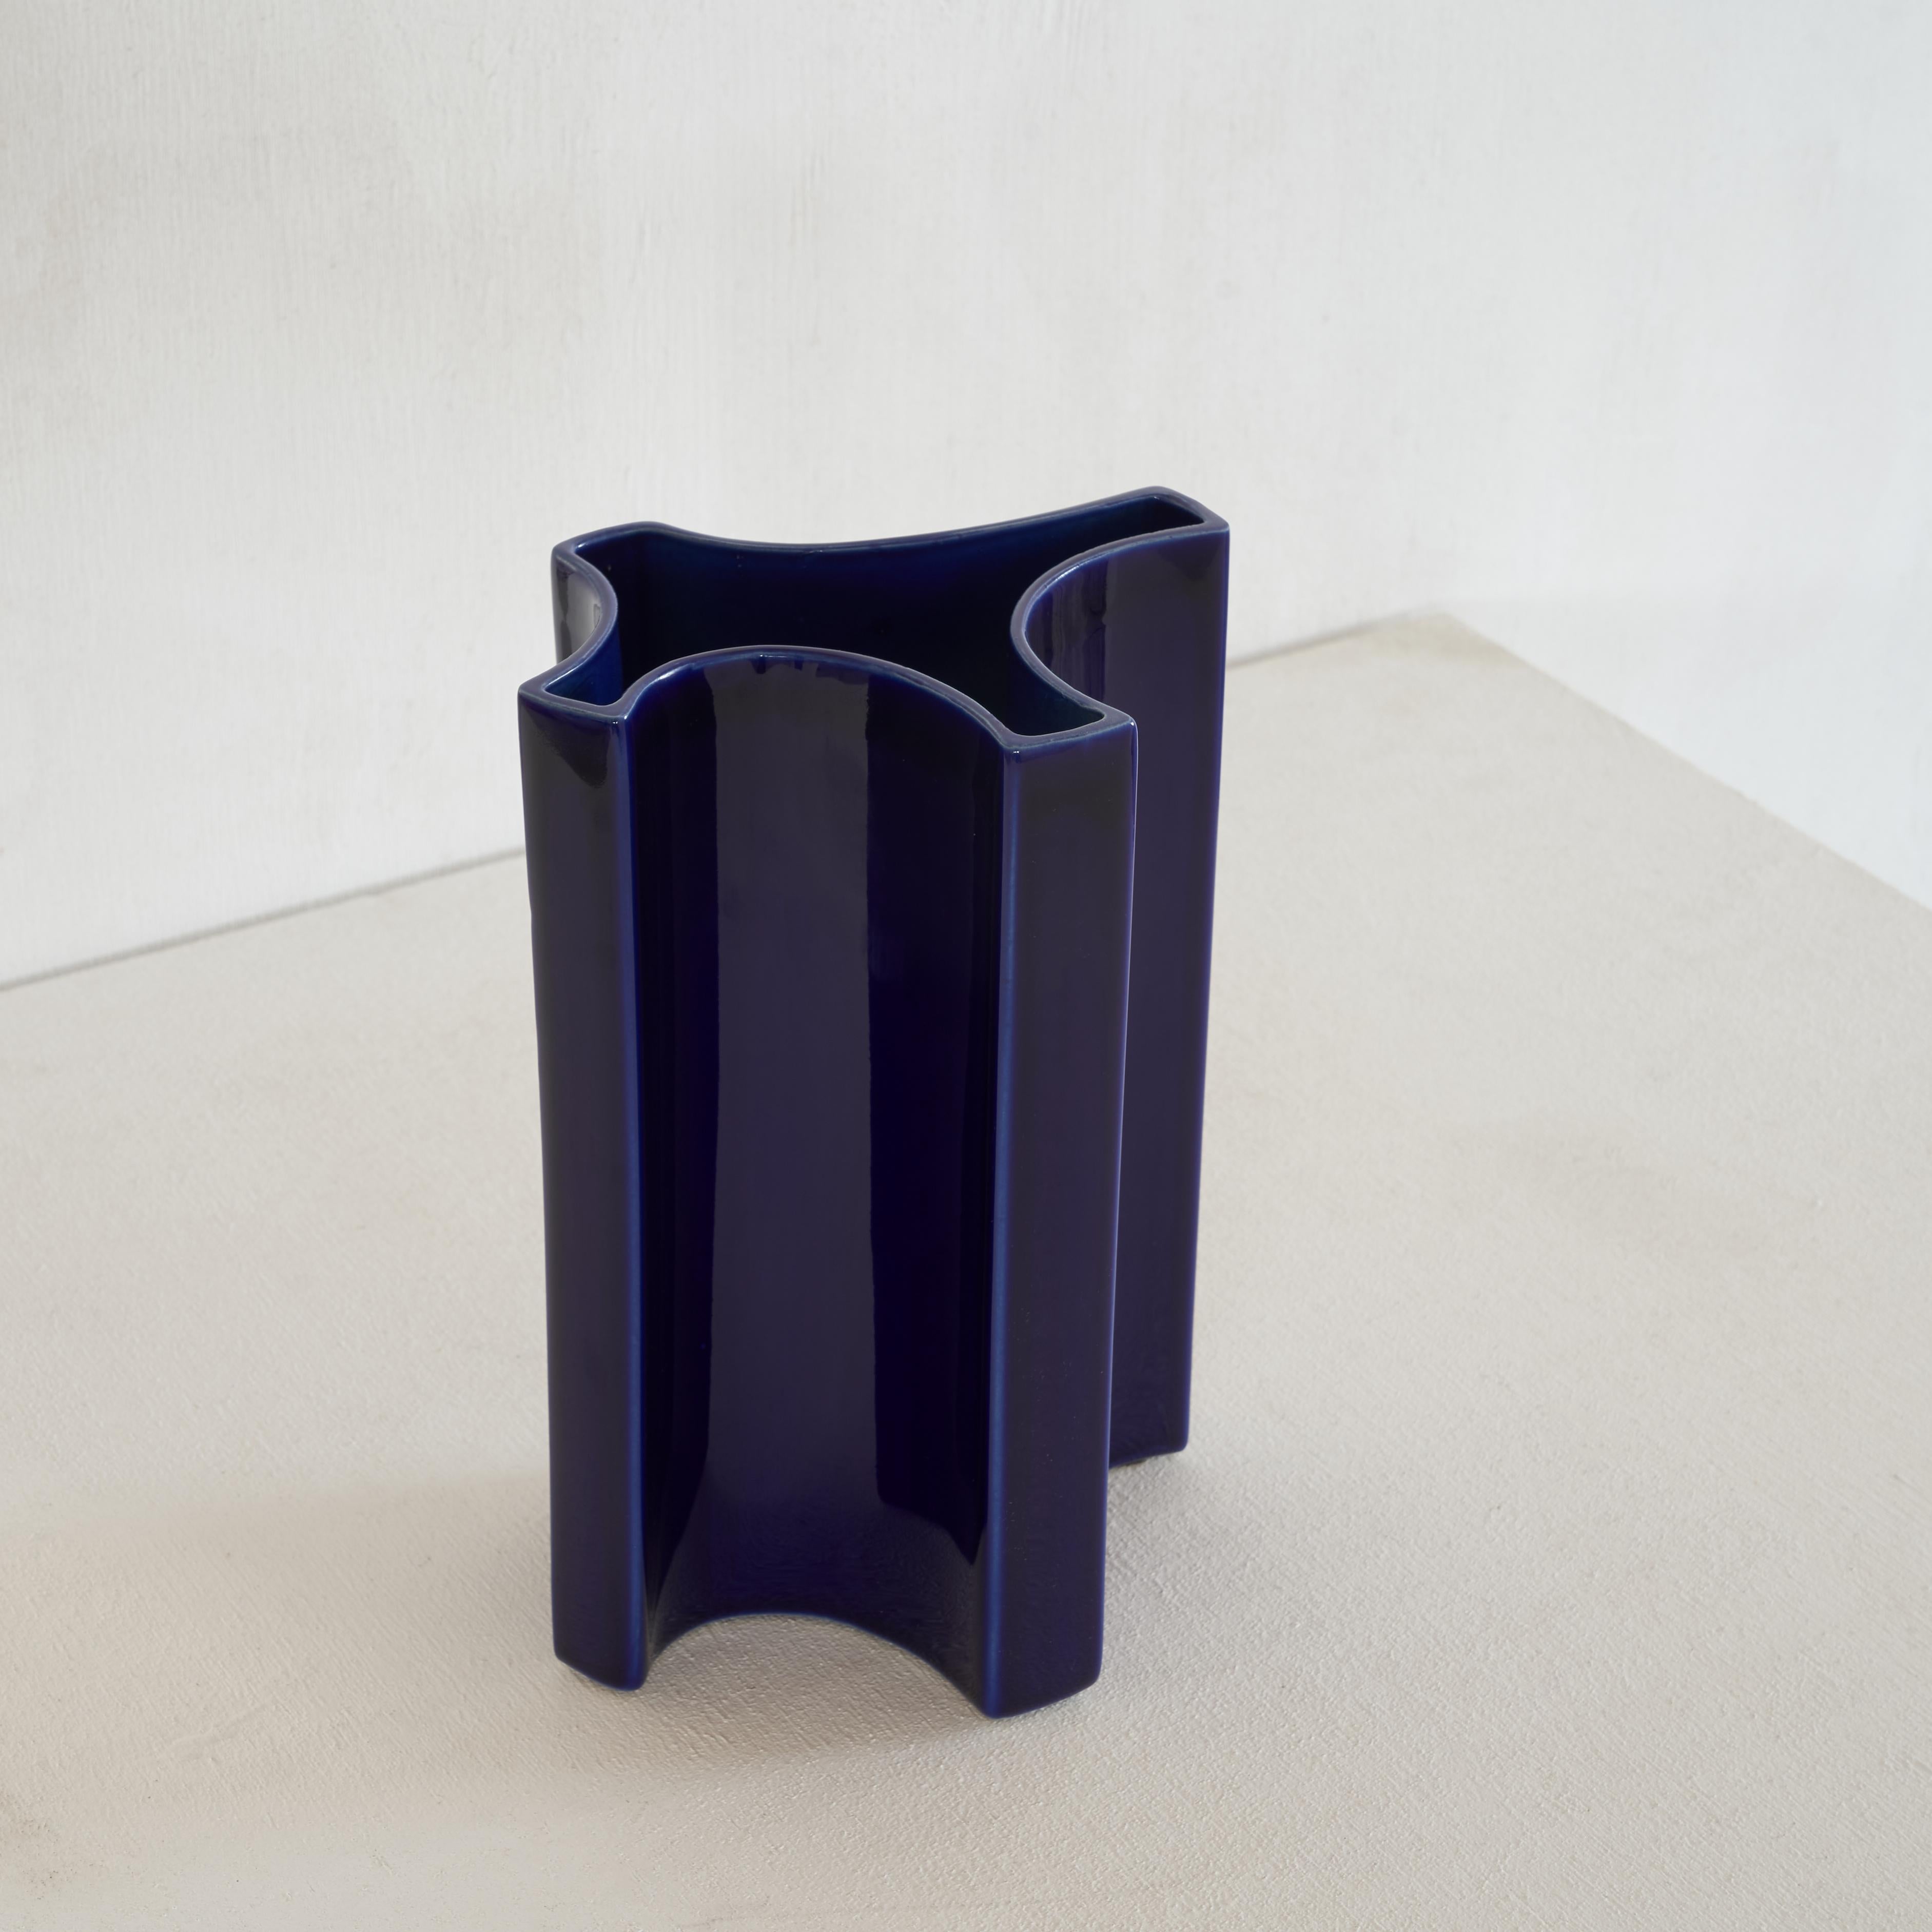 Fantastic freeform vase by Angelo Mangiarotti (1921 – 2012) in a great blue color for Fratelli Brambilla Milano.

Mangiarotti was a multi talented man and one of the great designers of the 20th century. He is known for his marble tables and